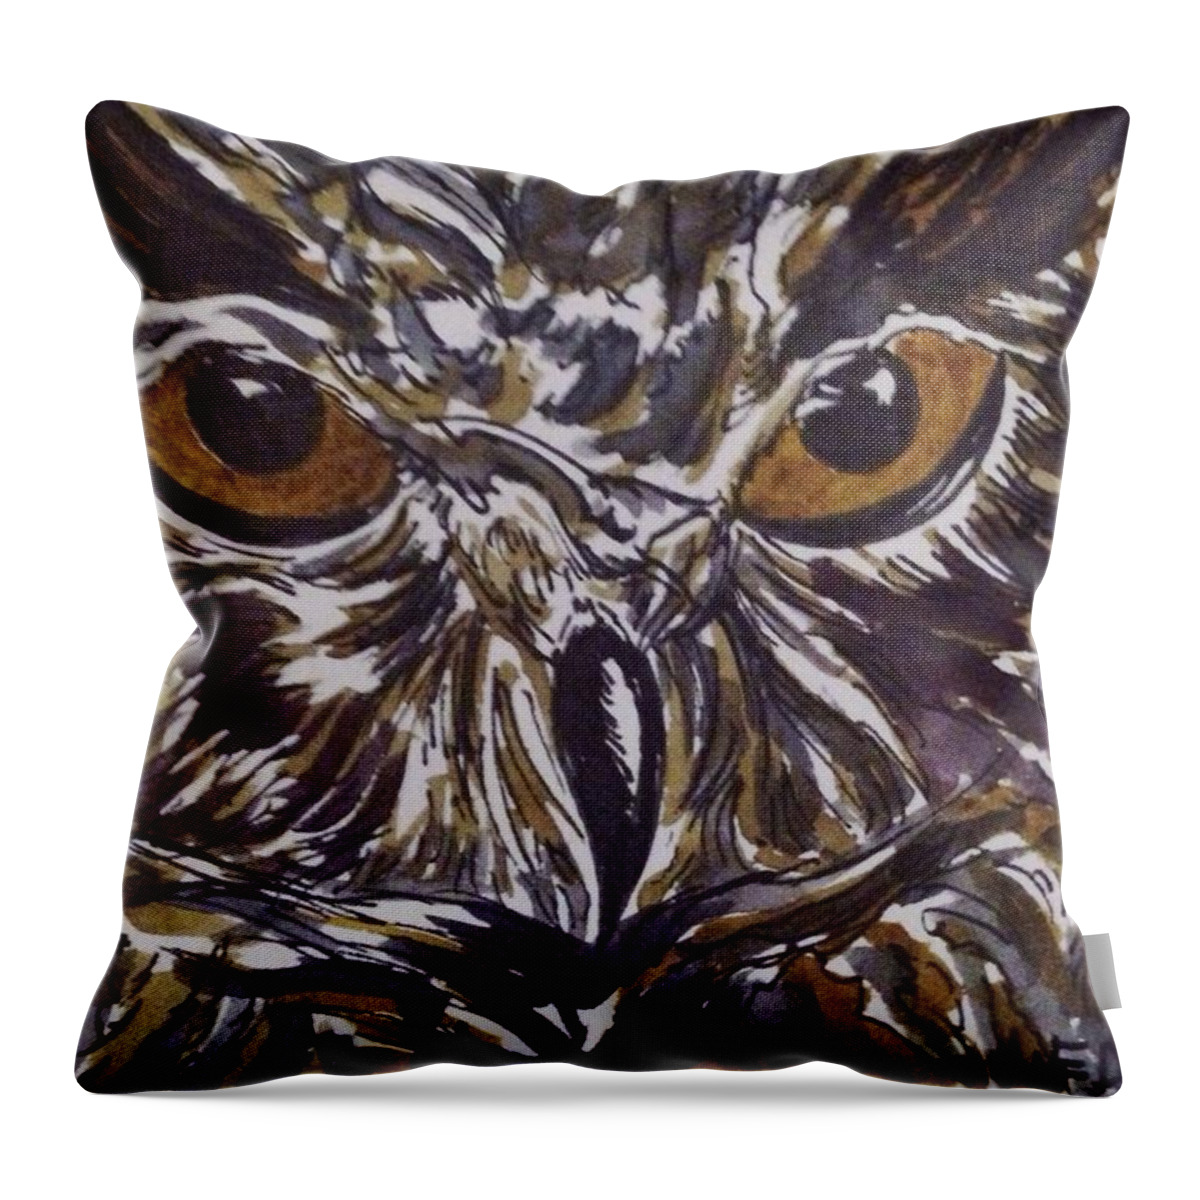 Owl Throw Pillow featuring the painting The Wise One by Angela Weddle